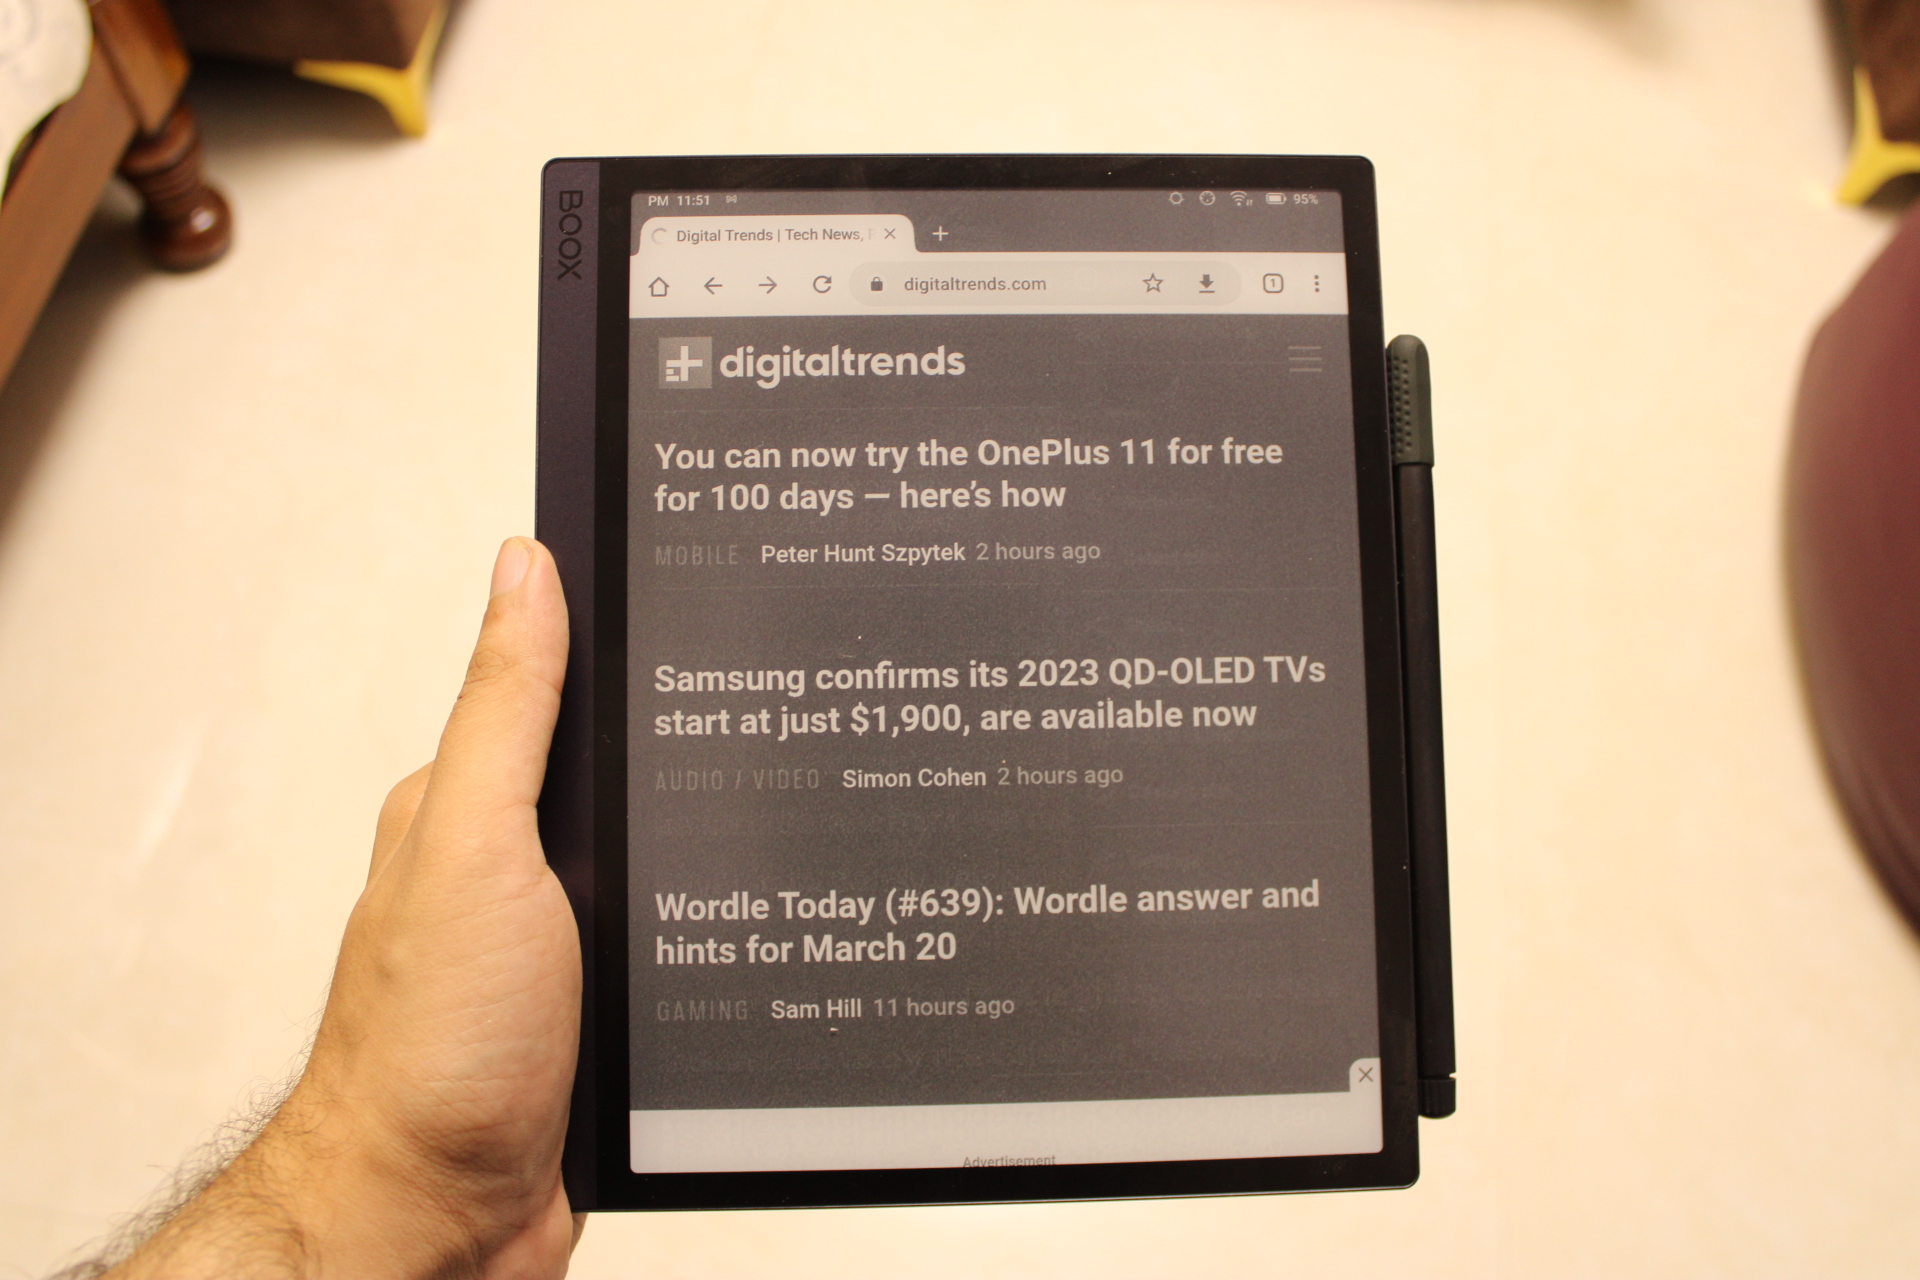 Onyx Boox Tab X review: e-ink tablet goes big on specs and price